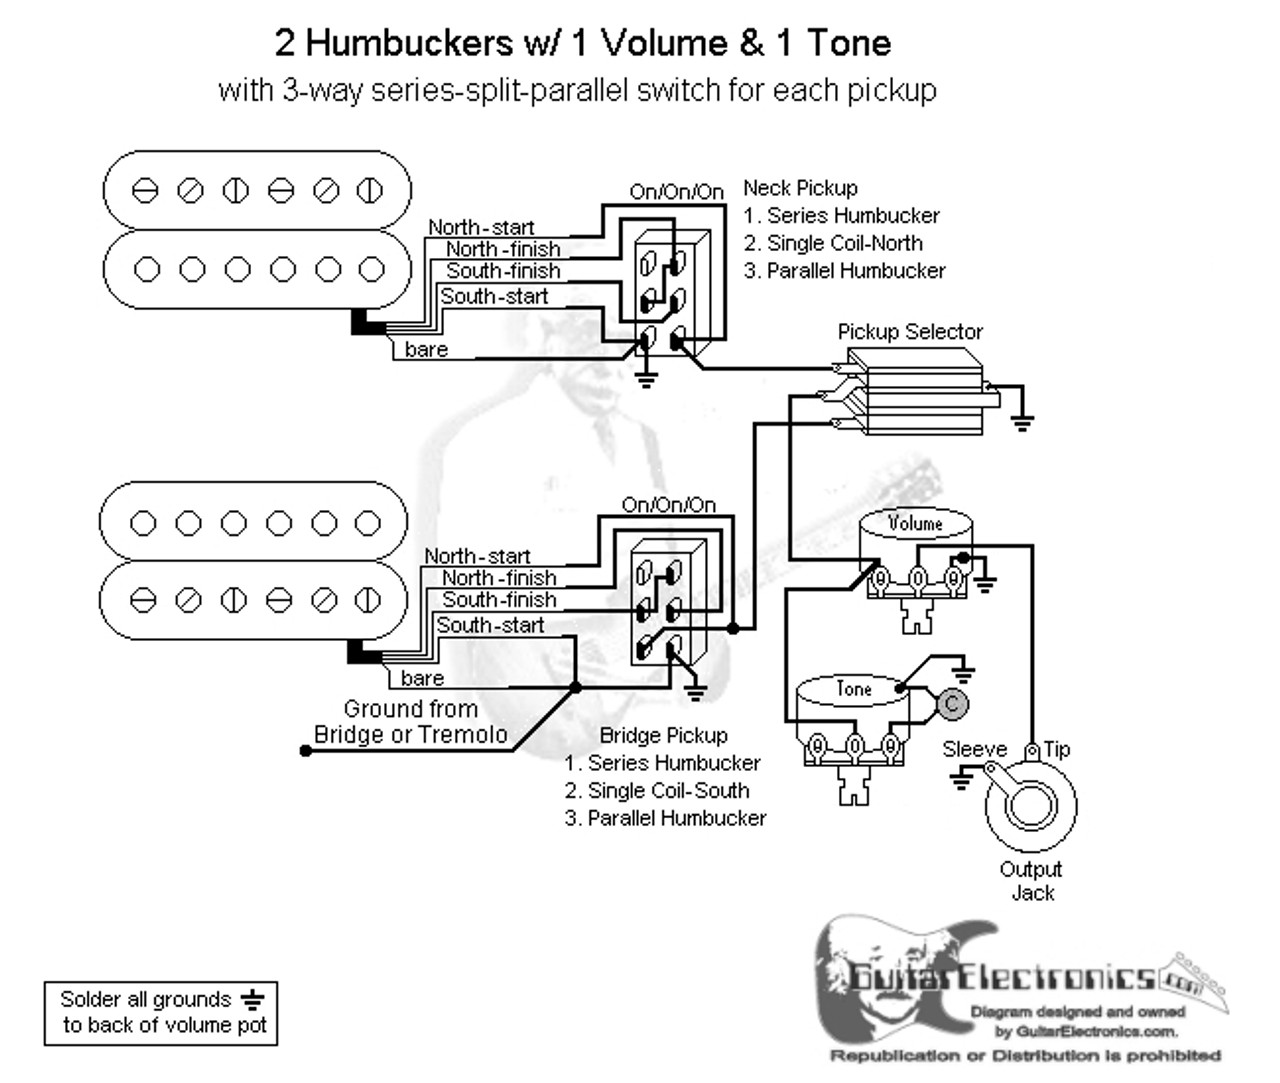 Guitar Wiring Diagram 2 Humbuckers Series-Parallel Switch from cdn11.bigcommerce.com